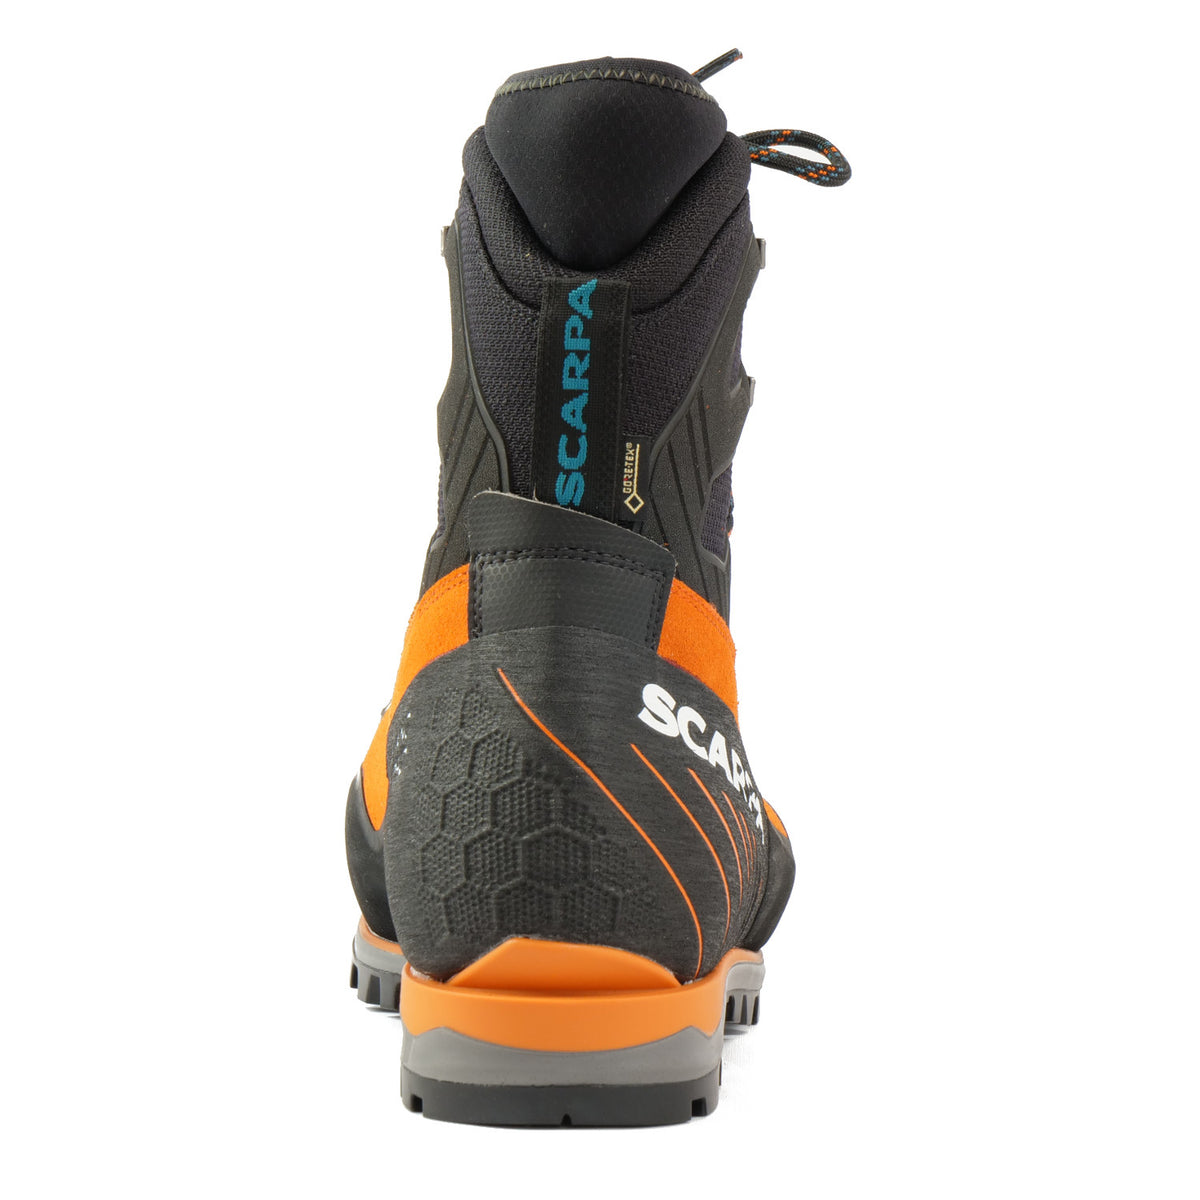 Rear view of the Scarpa Mont Blanc Pro GTX with orange Perwanger outer and black &amp; grey AC sole unit and blue Scarpa logo on the pull tap